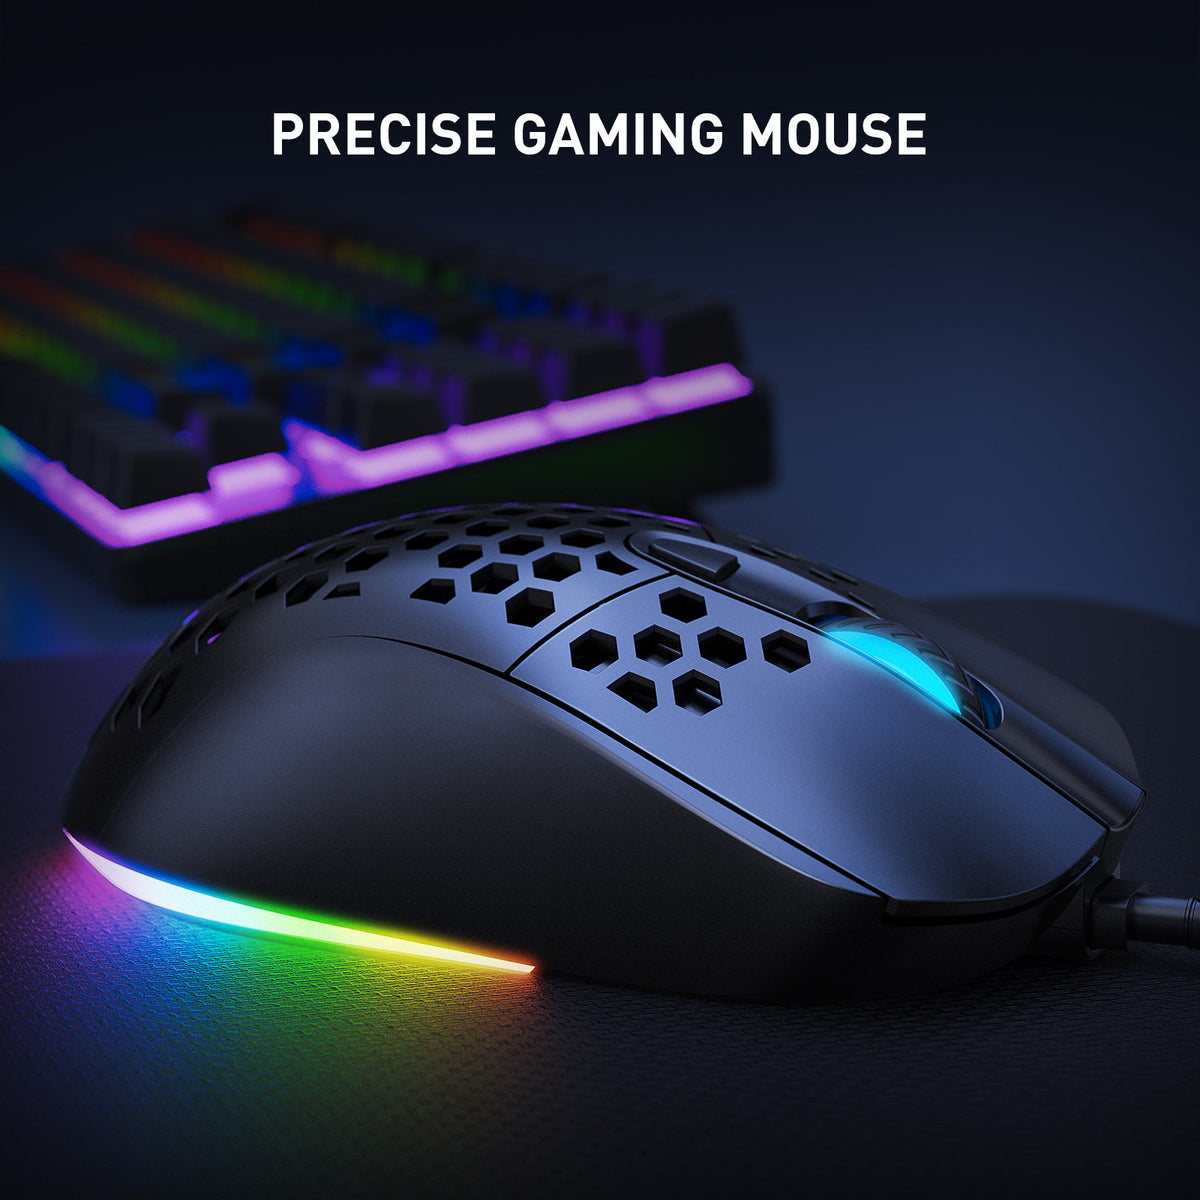 Verilux® RGB Wired Gaming Mouse Honeycomb Lightweight Ergonomic Mouse Max 7200 DPI Ultra Smooth Tracking